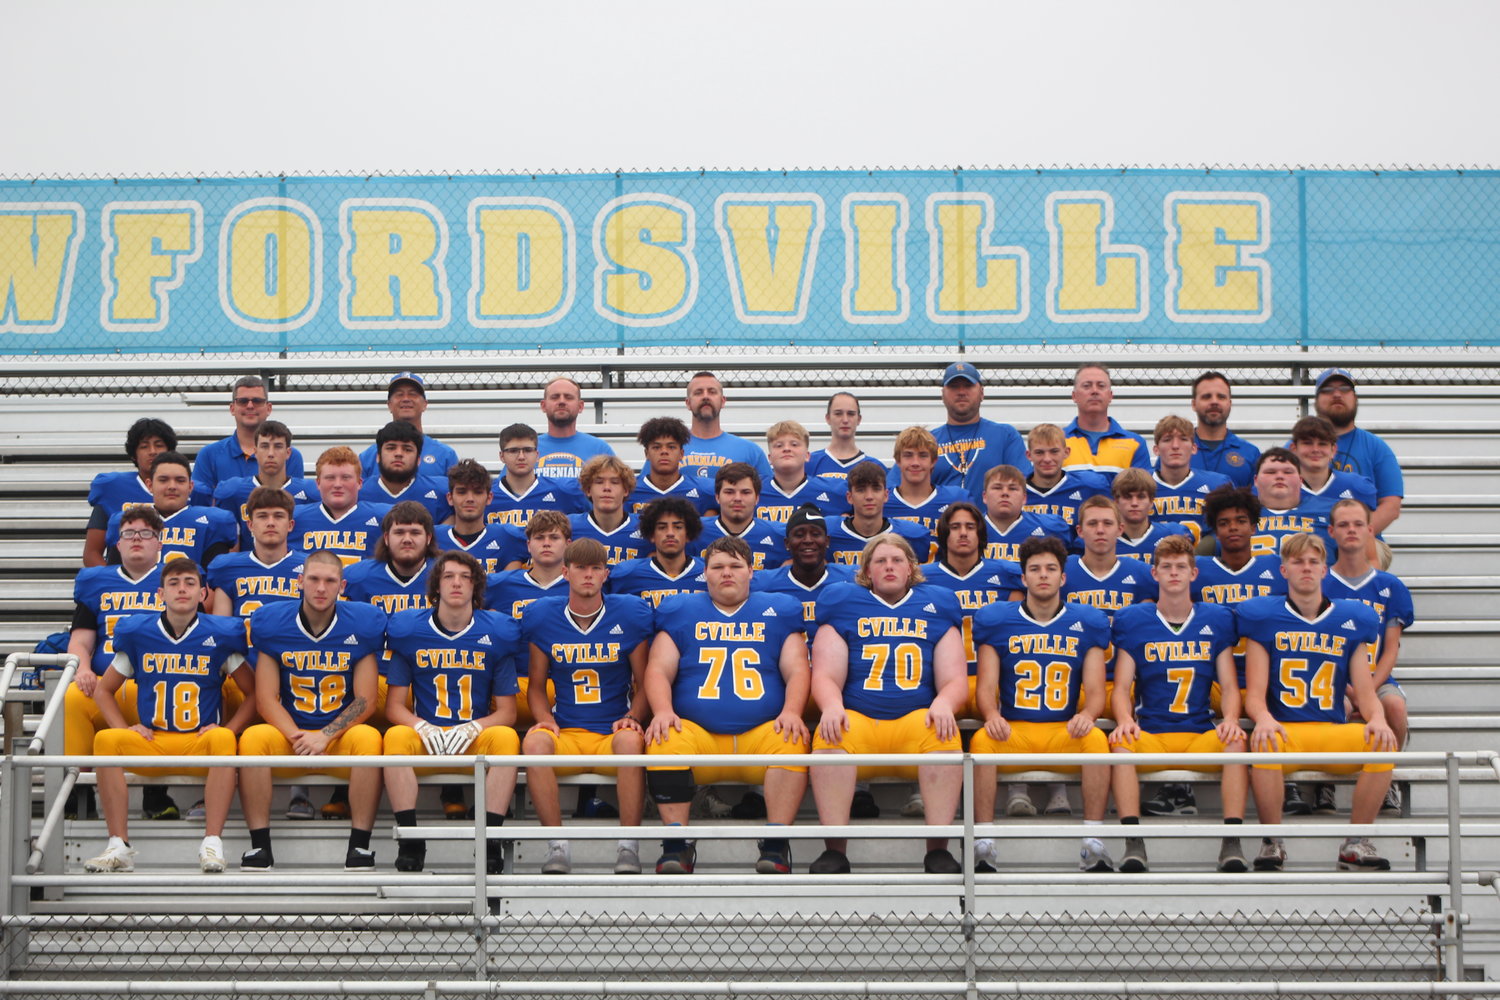 Crawfordsville Football will be under the direction of Brad Clark for the 2022 season as he looks to build a foundation for success for the Athenian program.